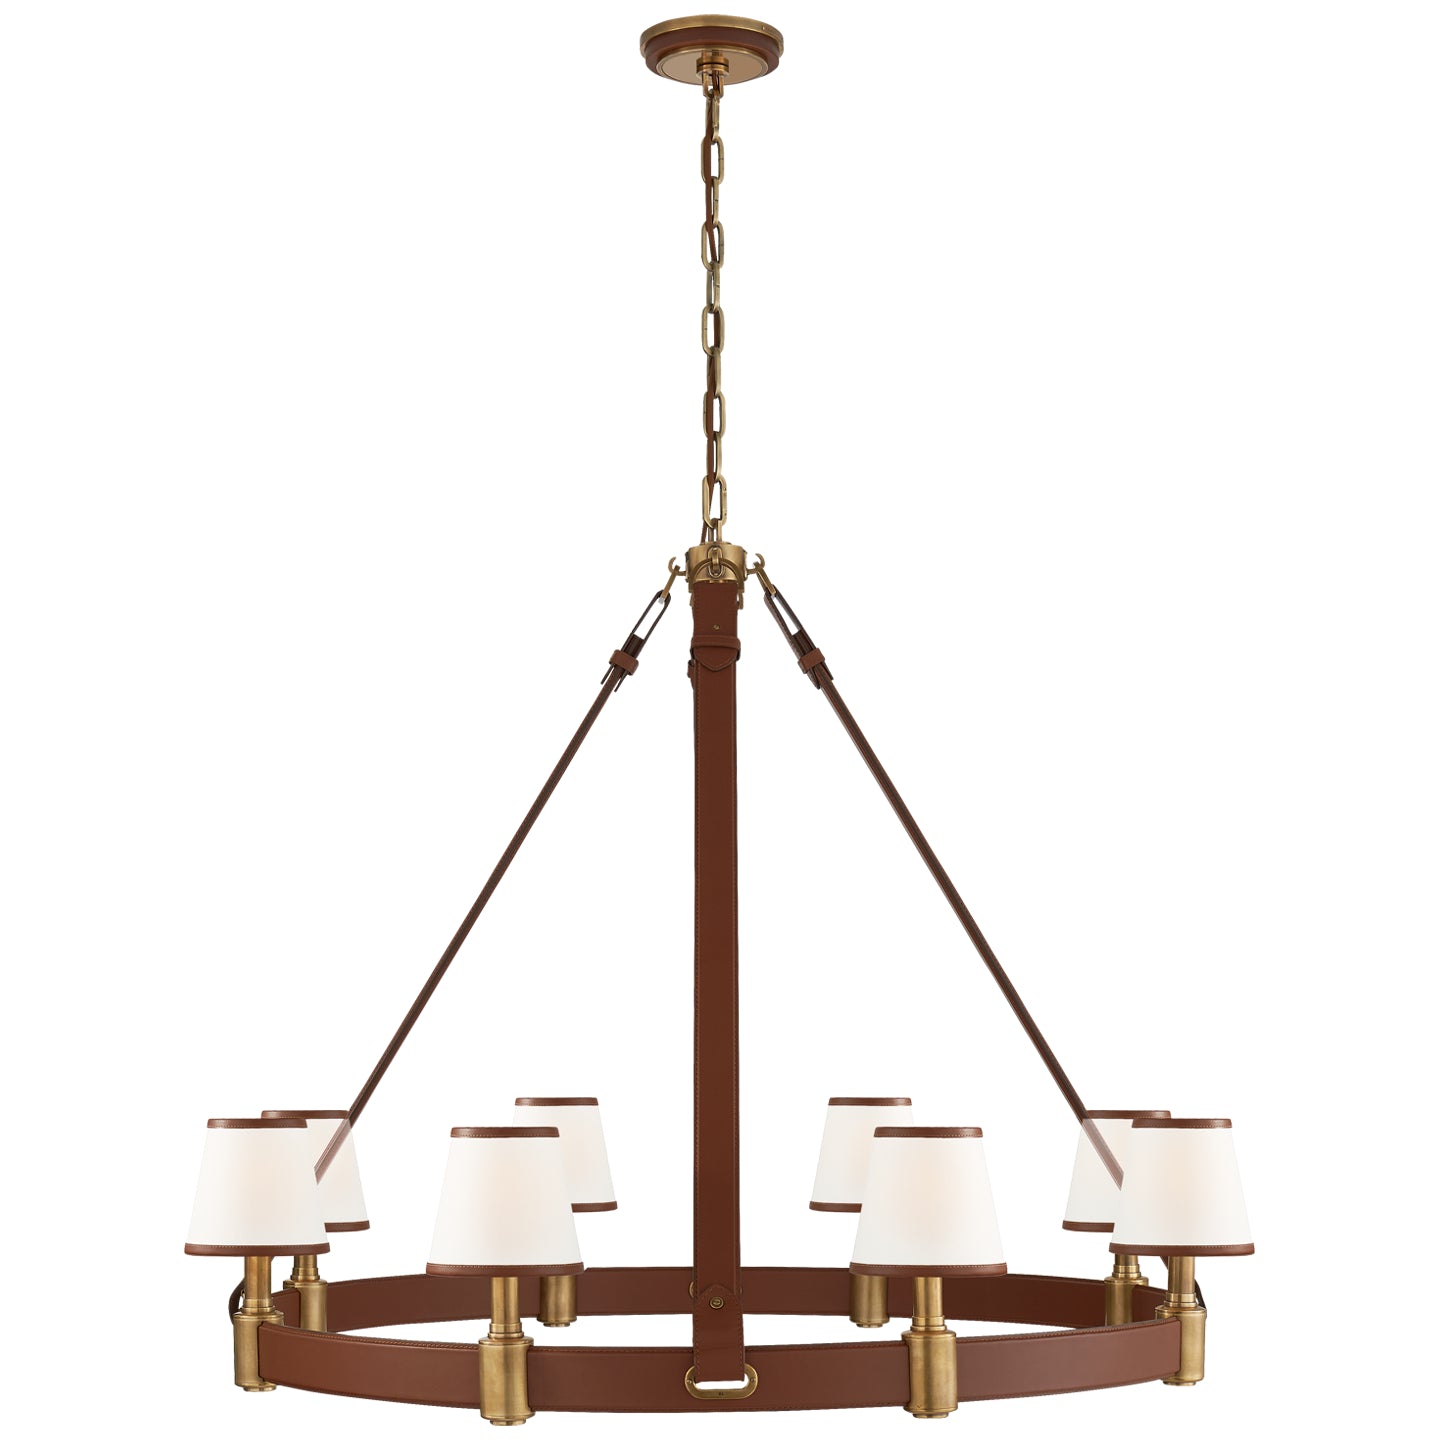 Ralph Lauren Canada - Eight Light Chandelier - Riley - Natural Brass and Saddle Leather- Union Lighting Luminaires Decor